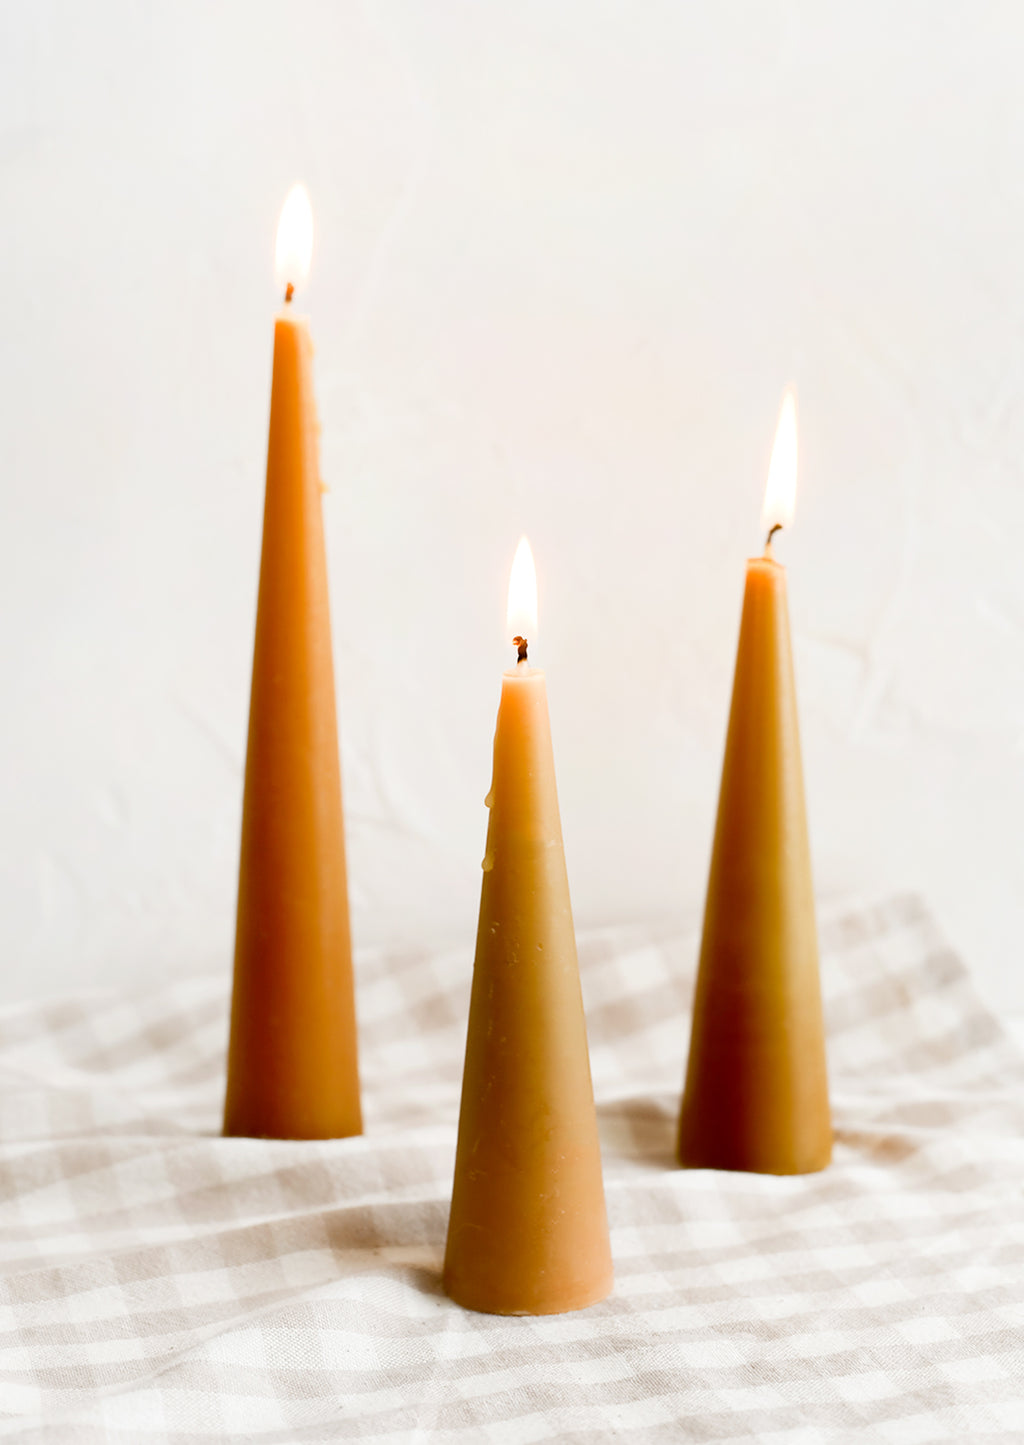 Small / Caramel: Three lit cone-shaped taper candles in caramel.